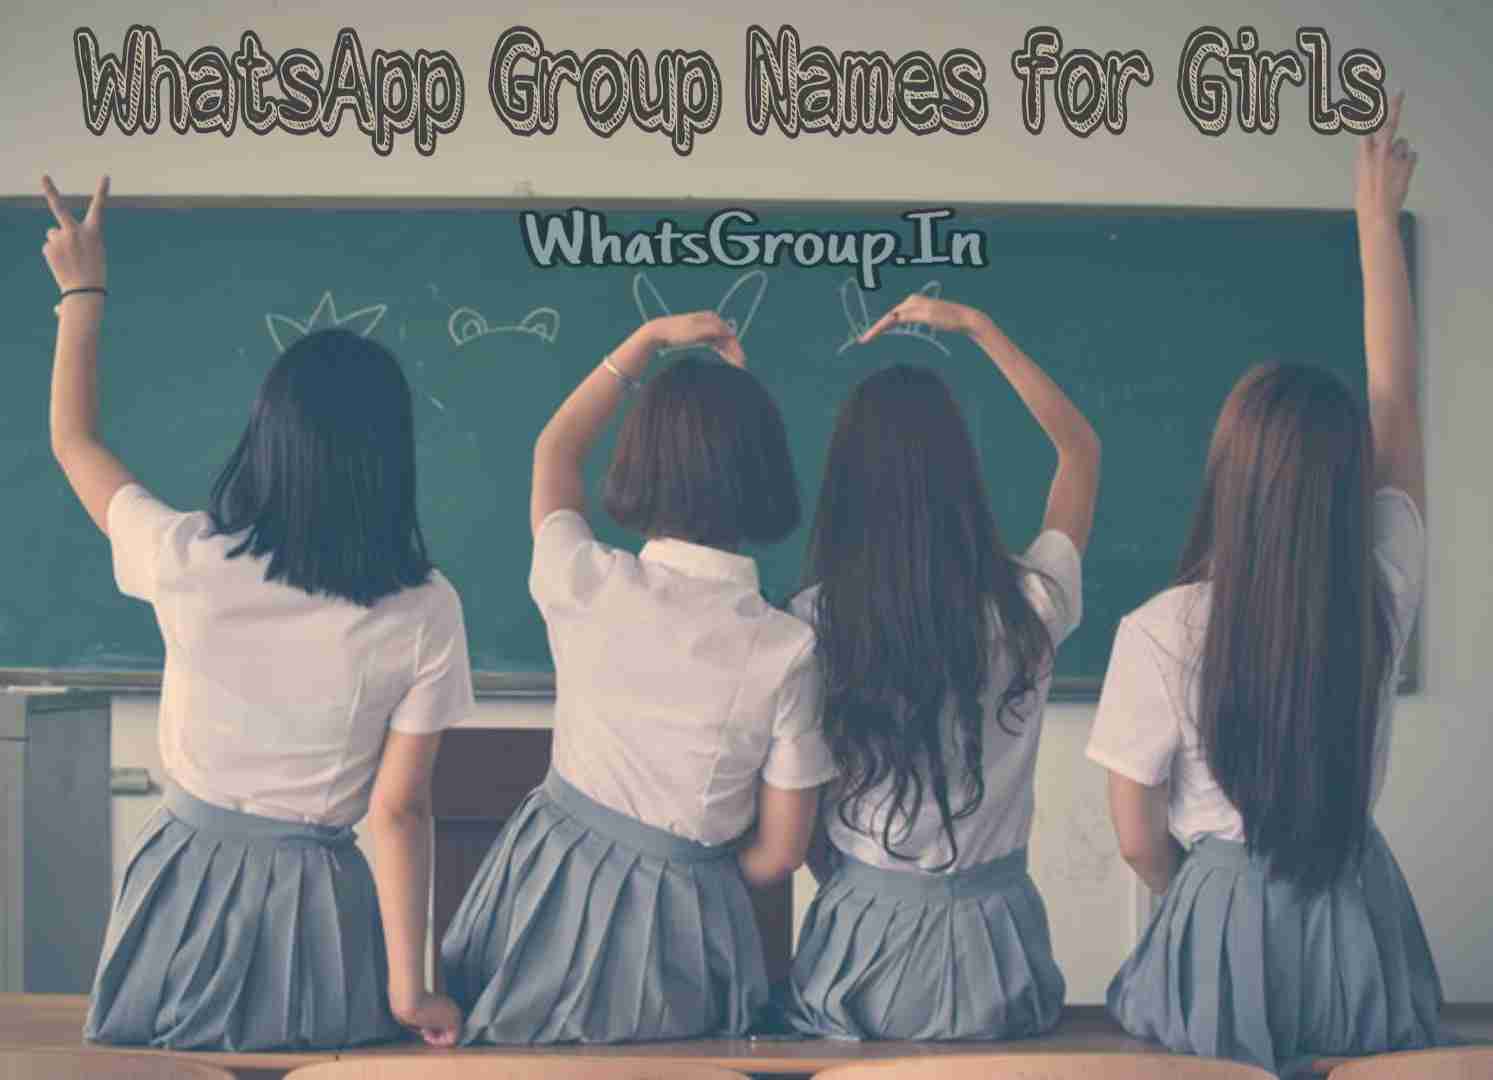 Girls group of Women's Group